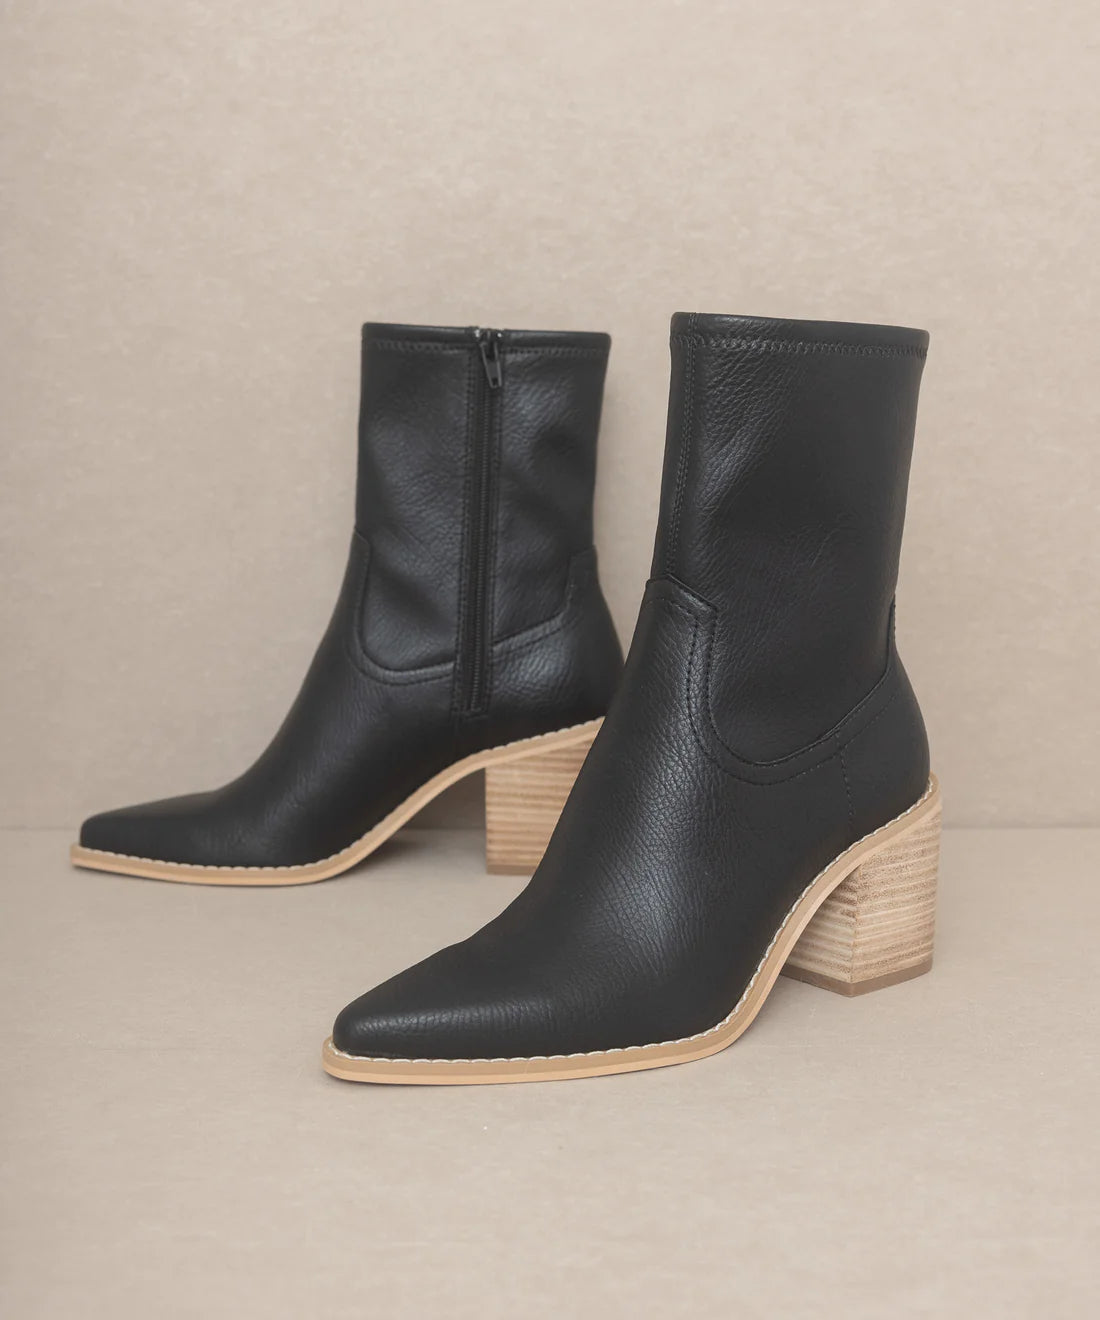 Vienna 70mm lace-up booties